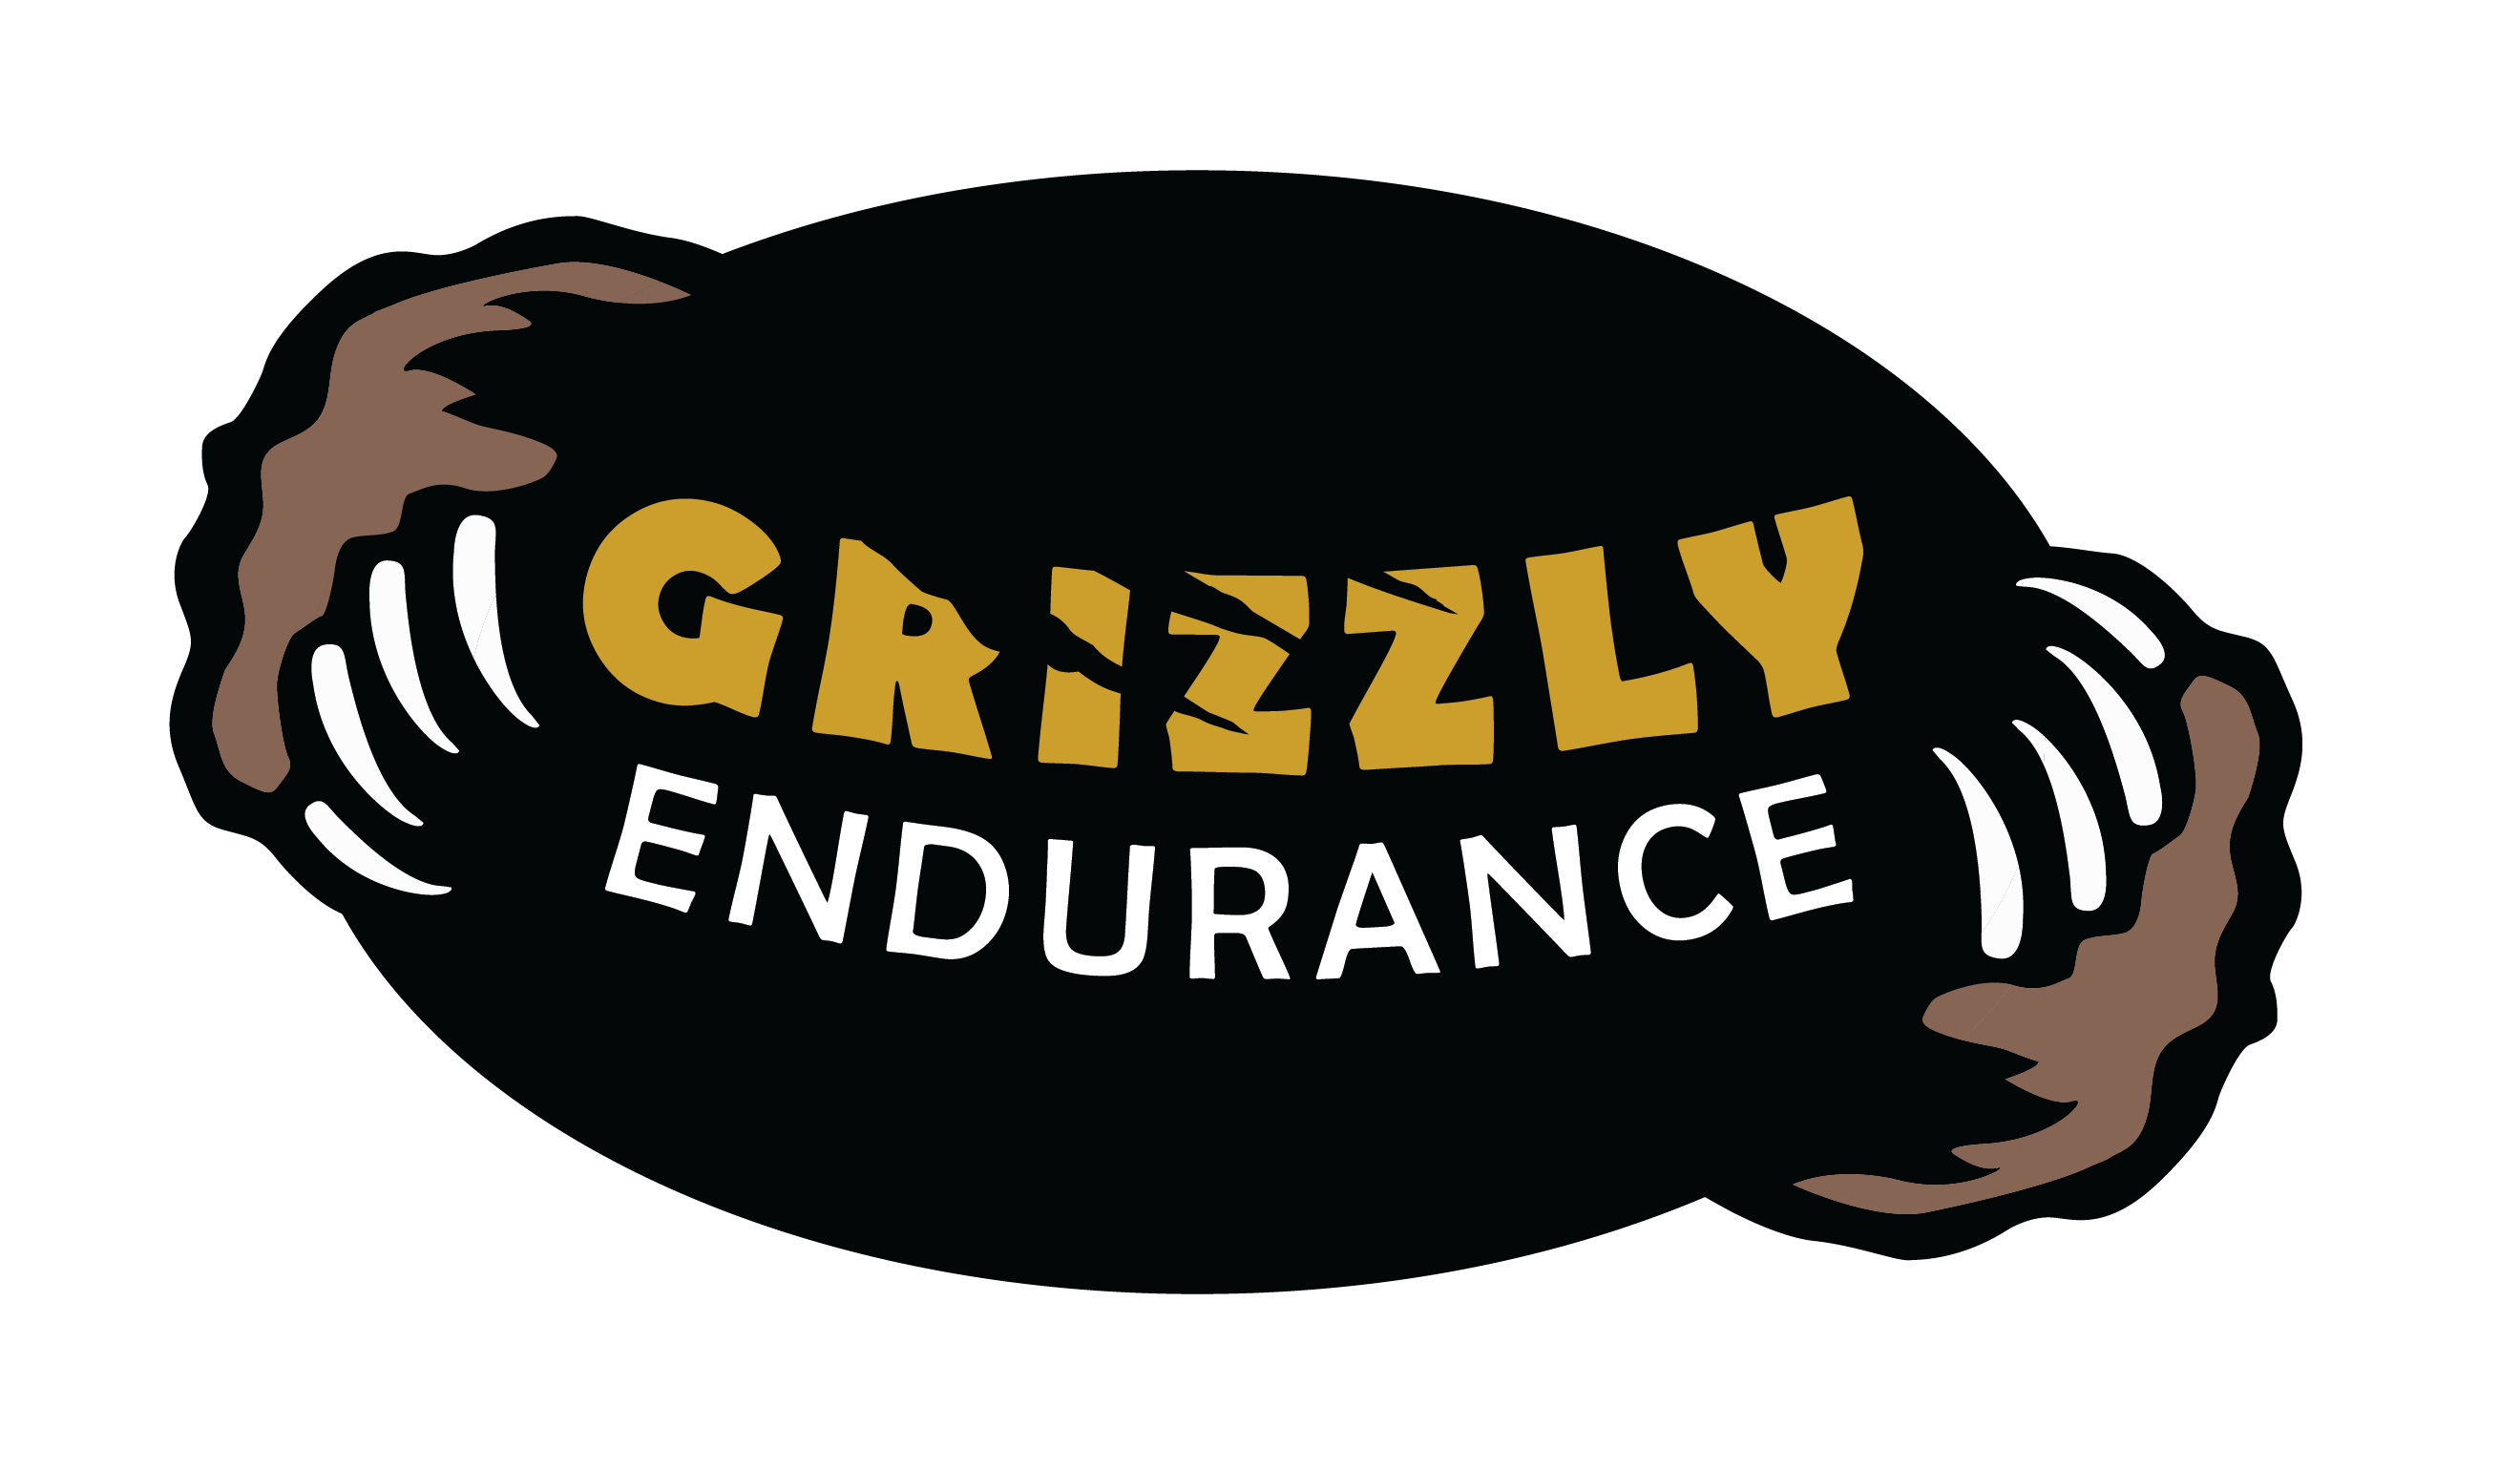 Grizzly Endurance